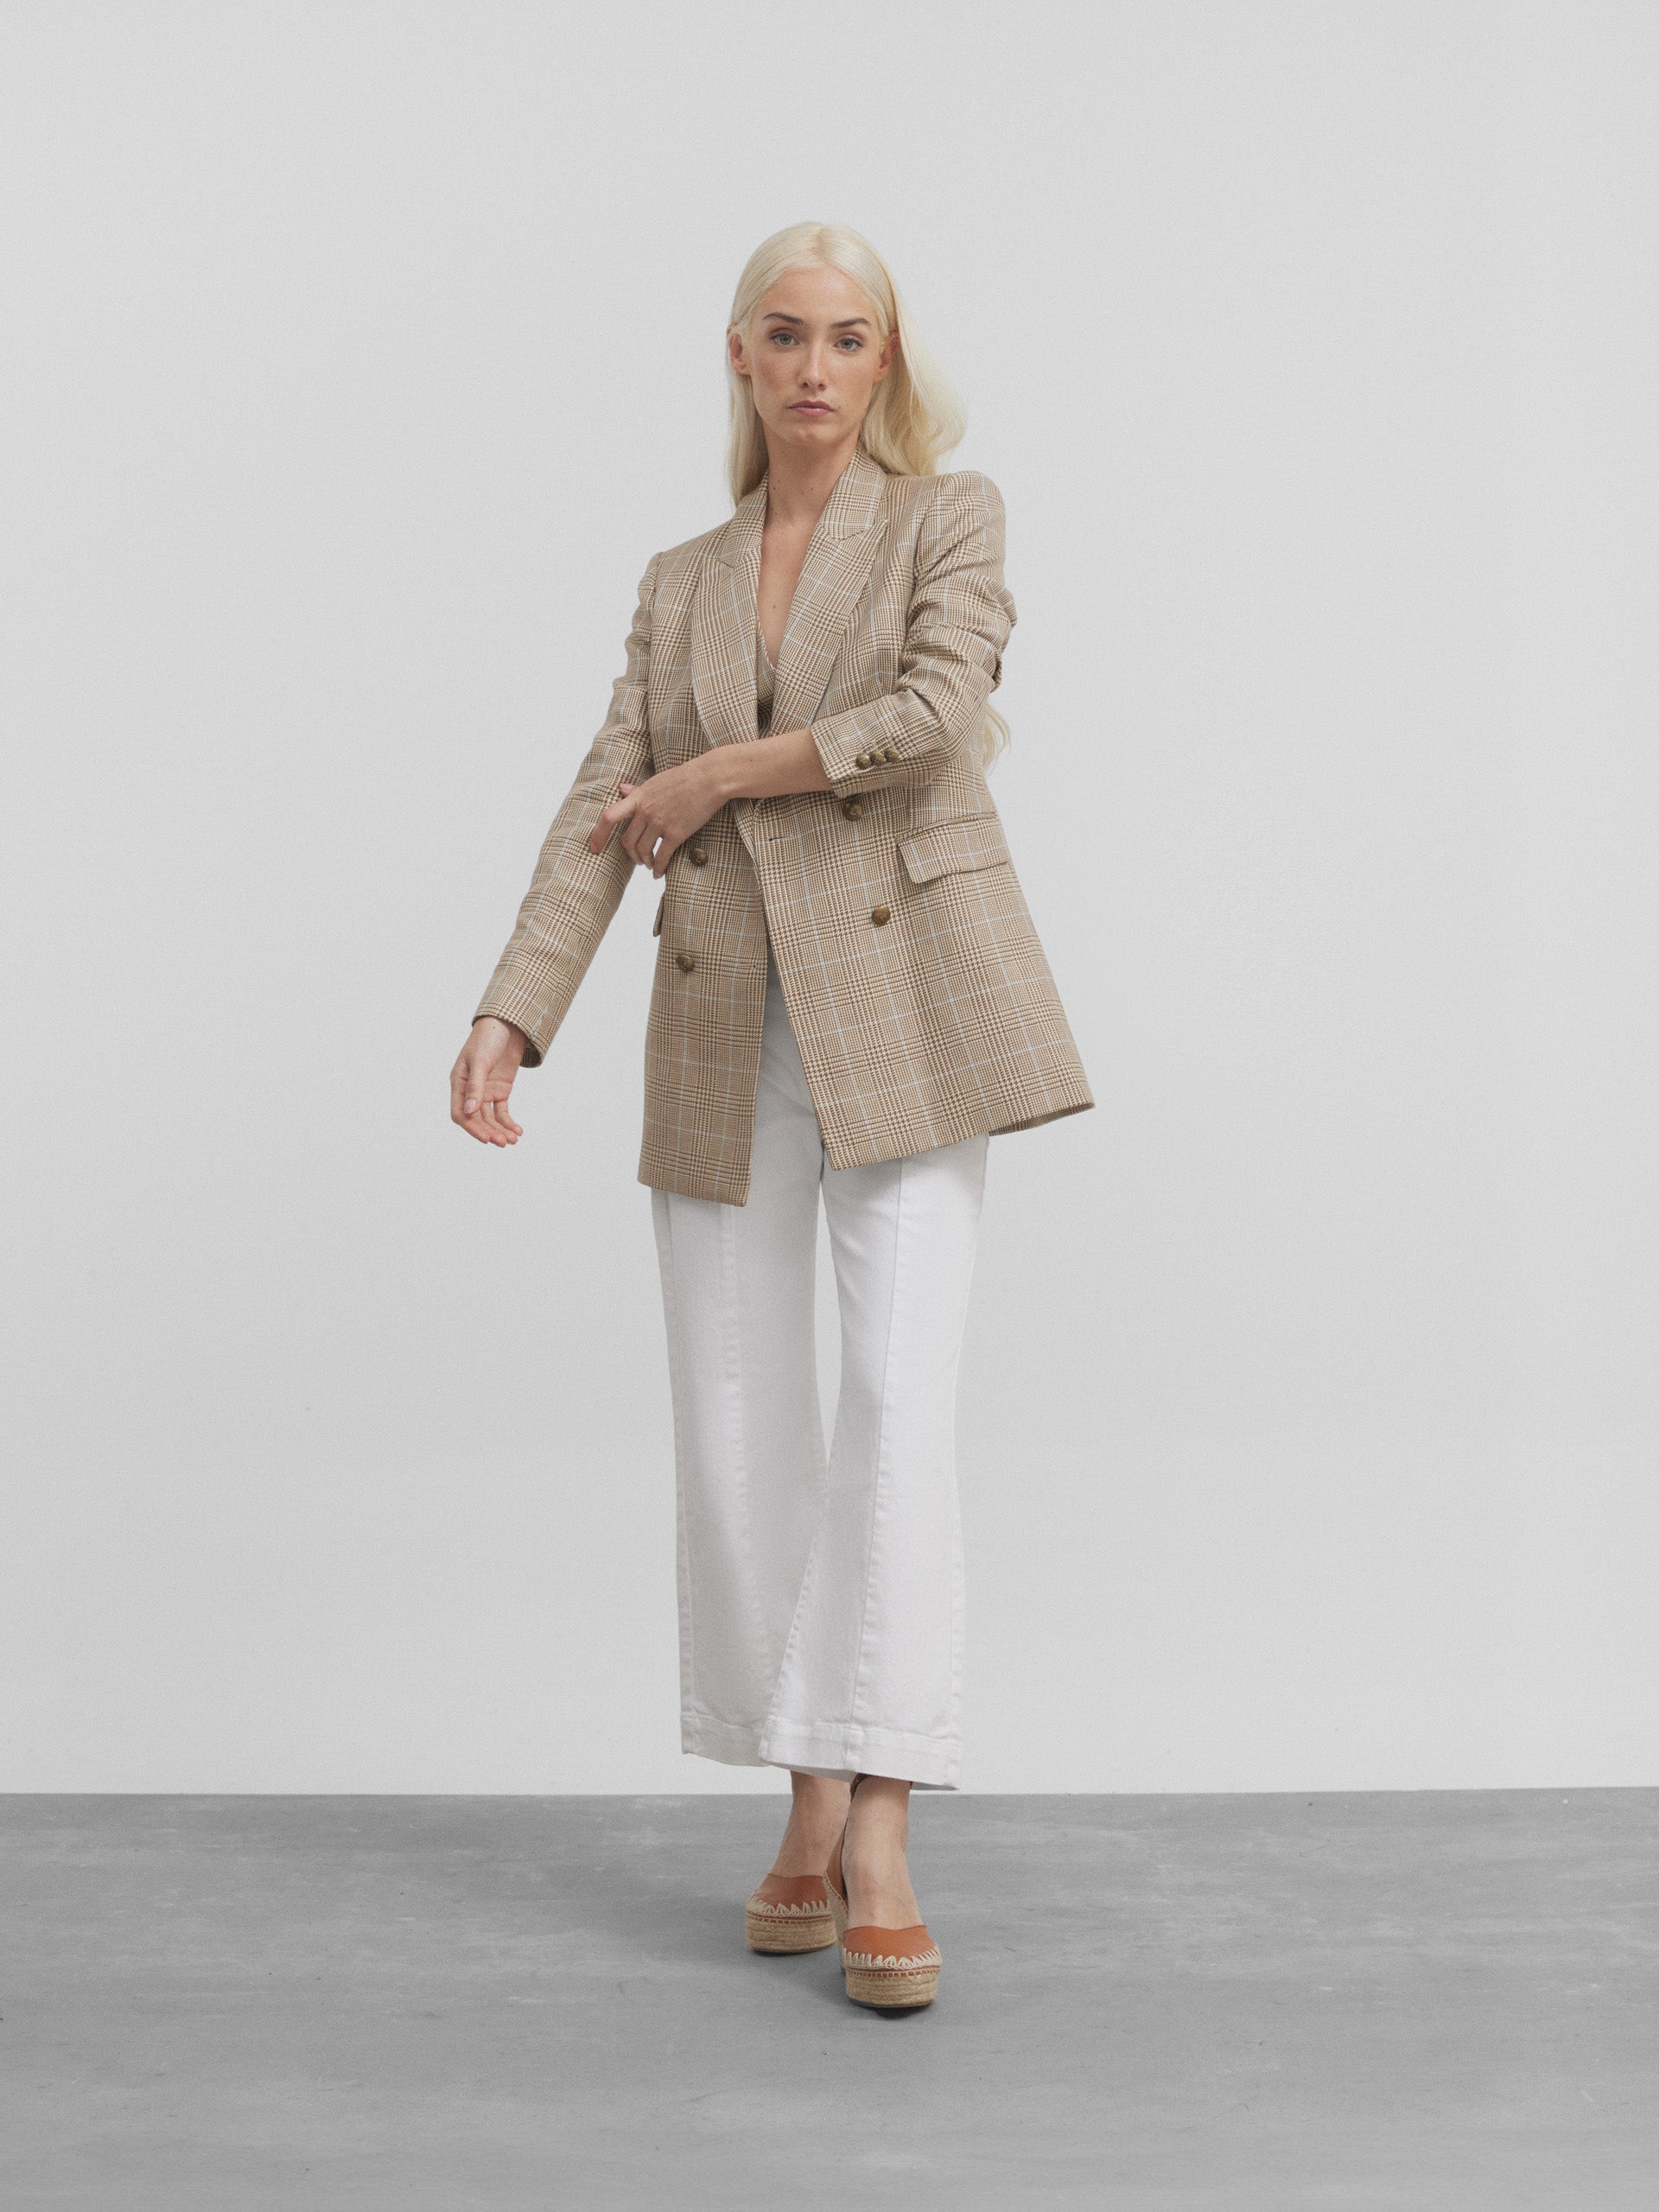 Prince of Wales beige blazer with light blue profile